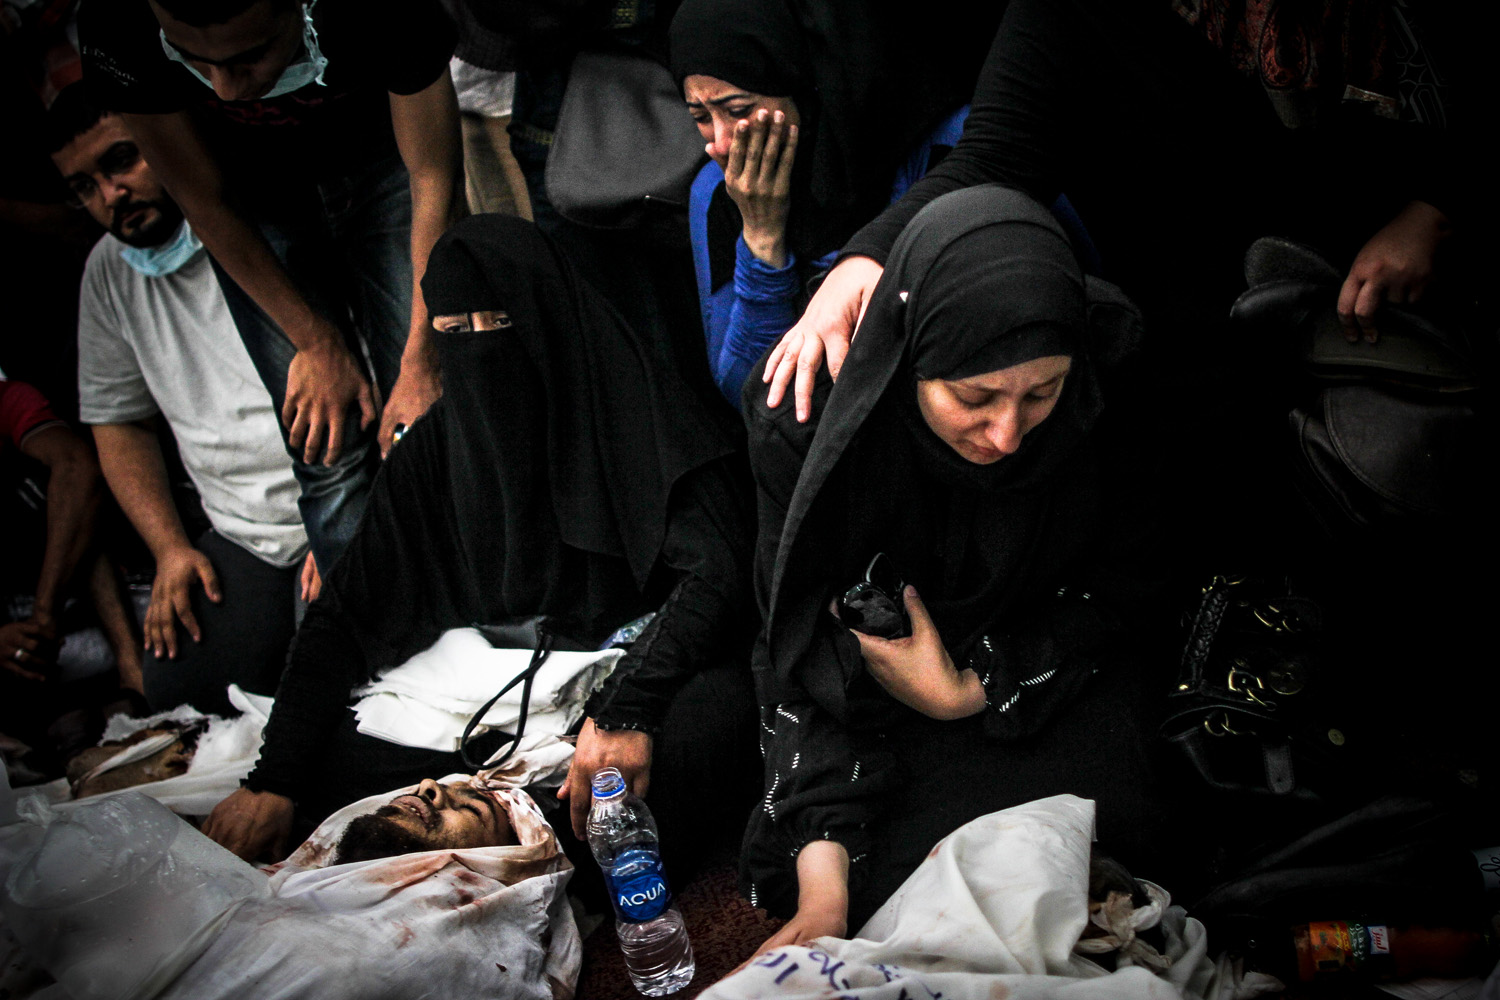 Aug. 15, 2013. Women mourn over bodies of  relatives in Iman mosque near Rabaa, a day after security forces violently dispersed the camp and killed over 800 protesters.